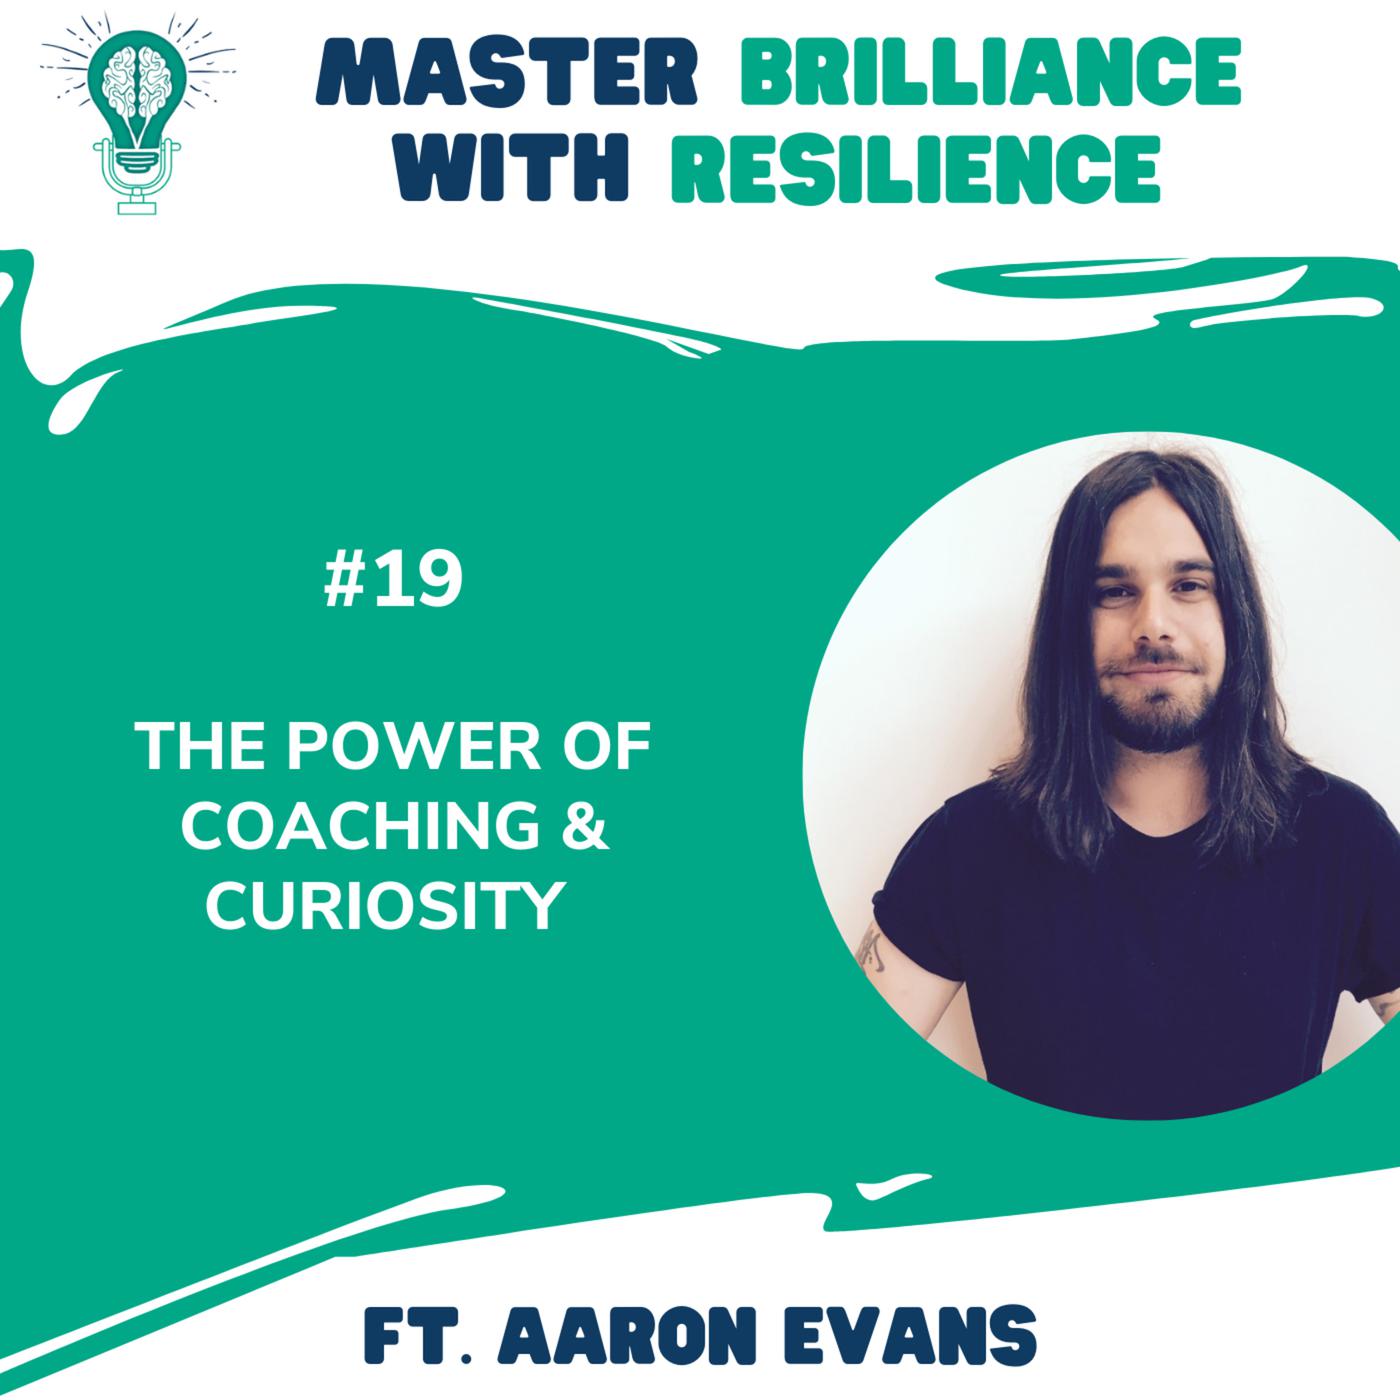 MASTER BRILLIANCE WITH RESILIENCE